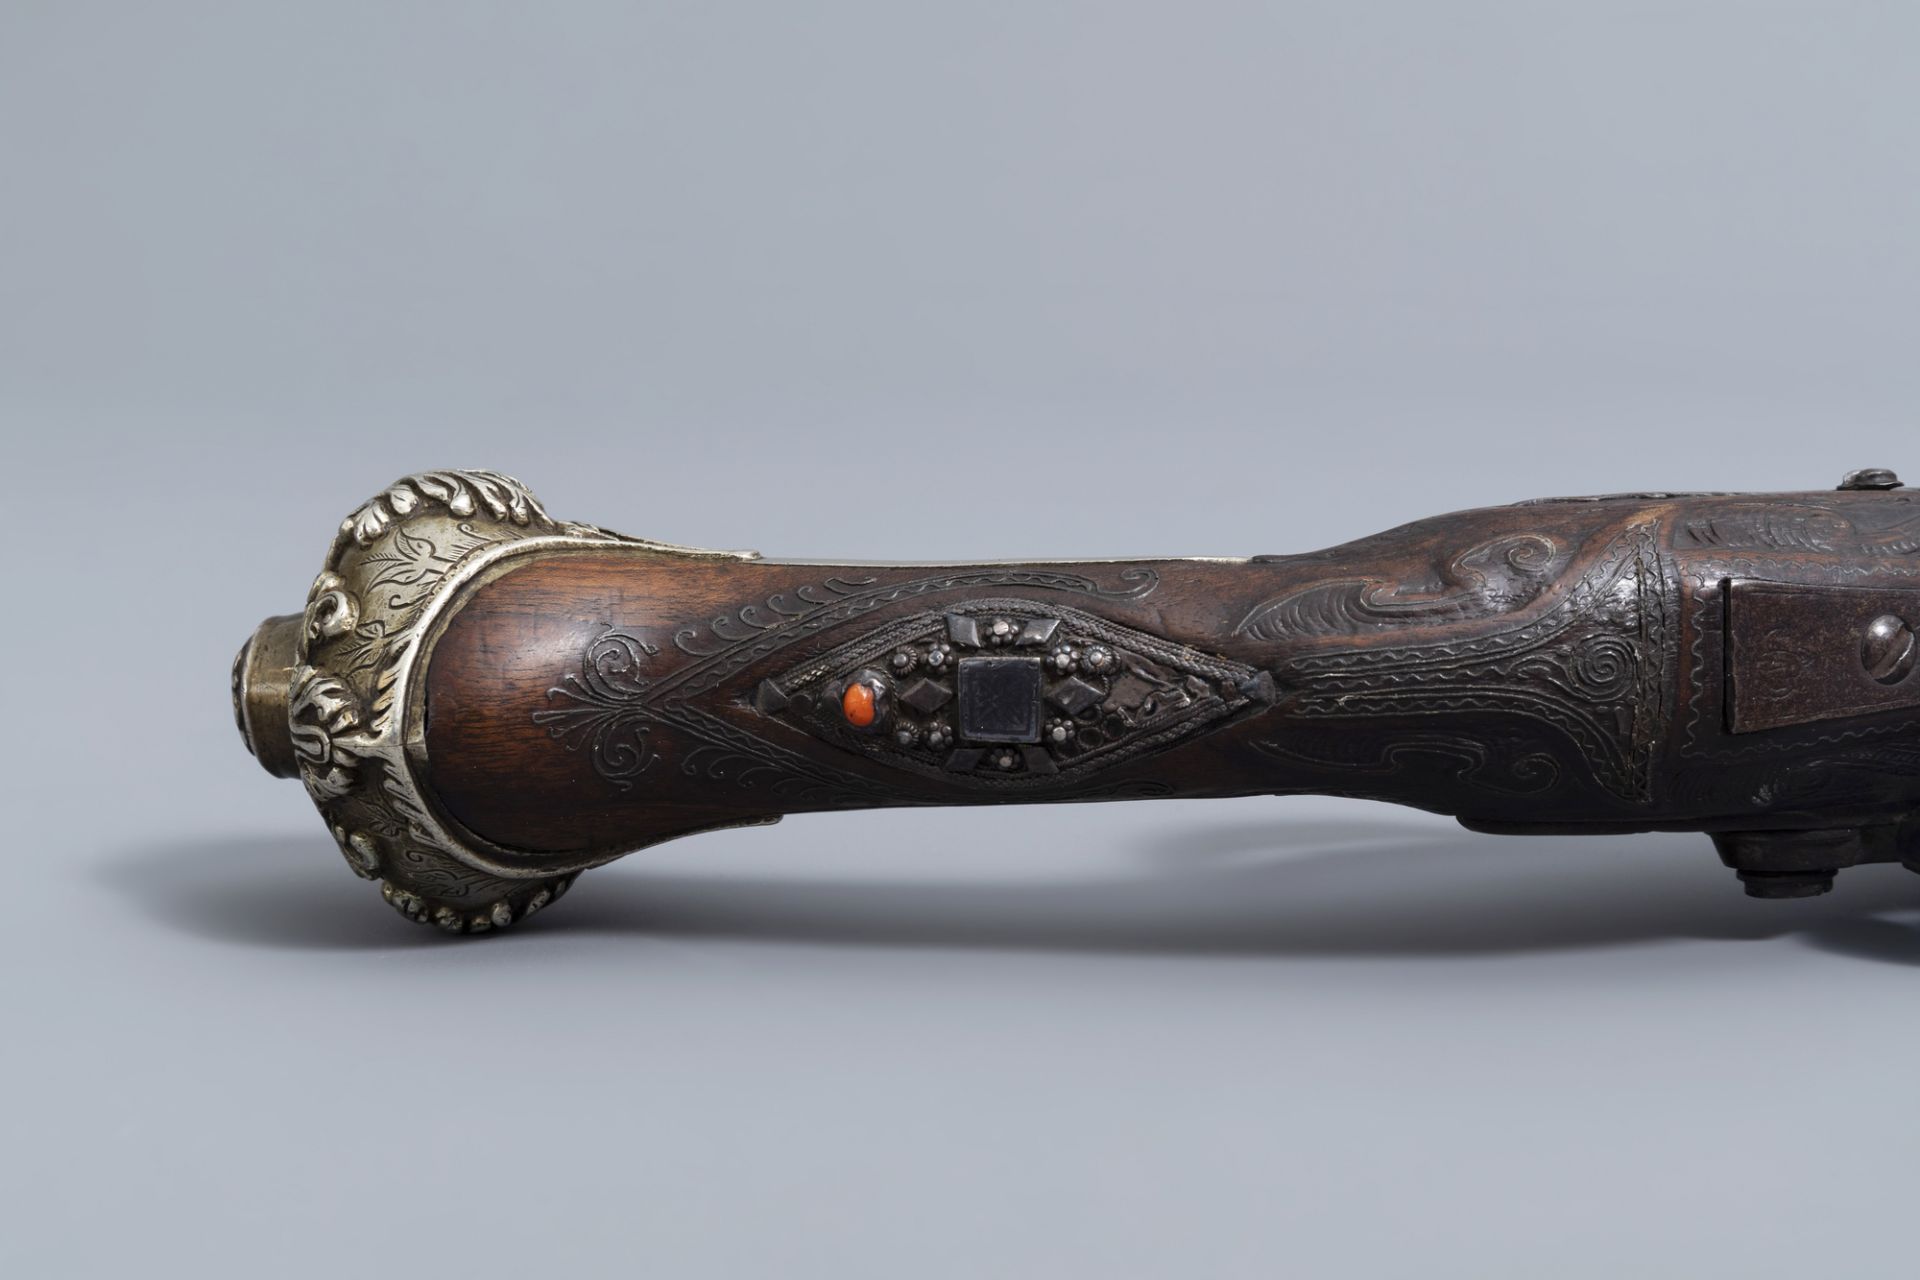 An Ottoman coral inlaid and silver mounted flintlock pistol, Algeria, 18th C. - Image 10 of 12